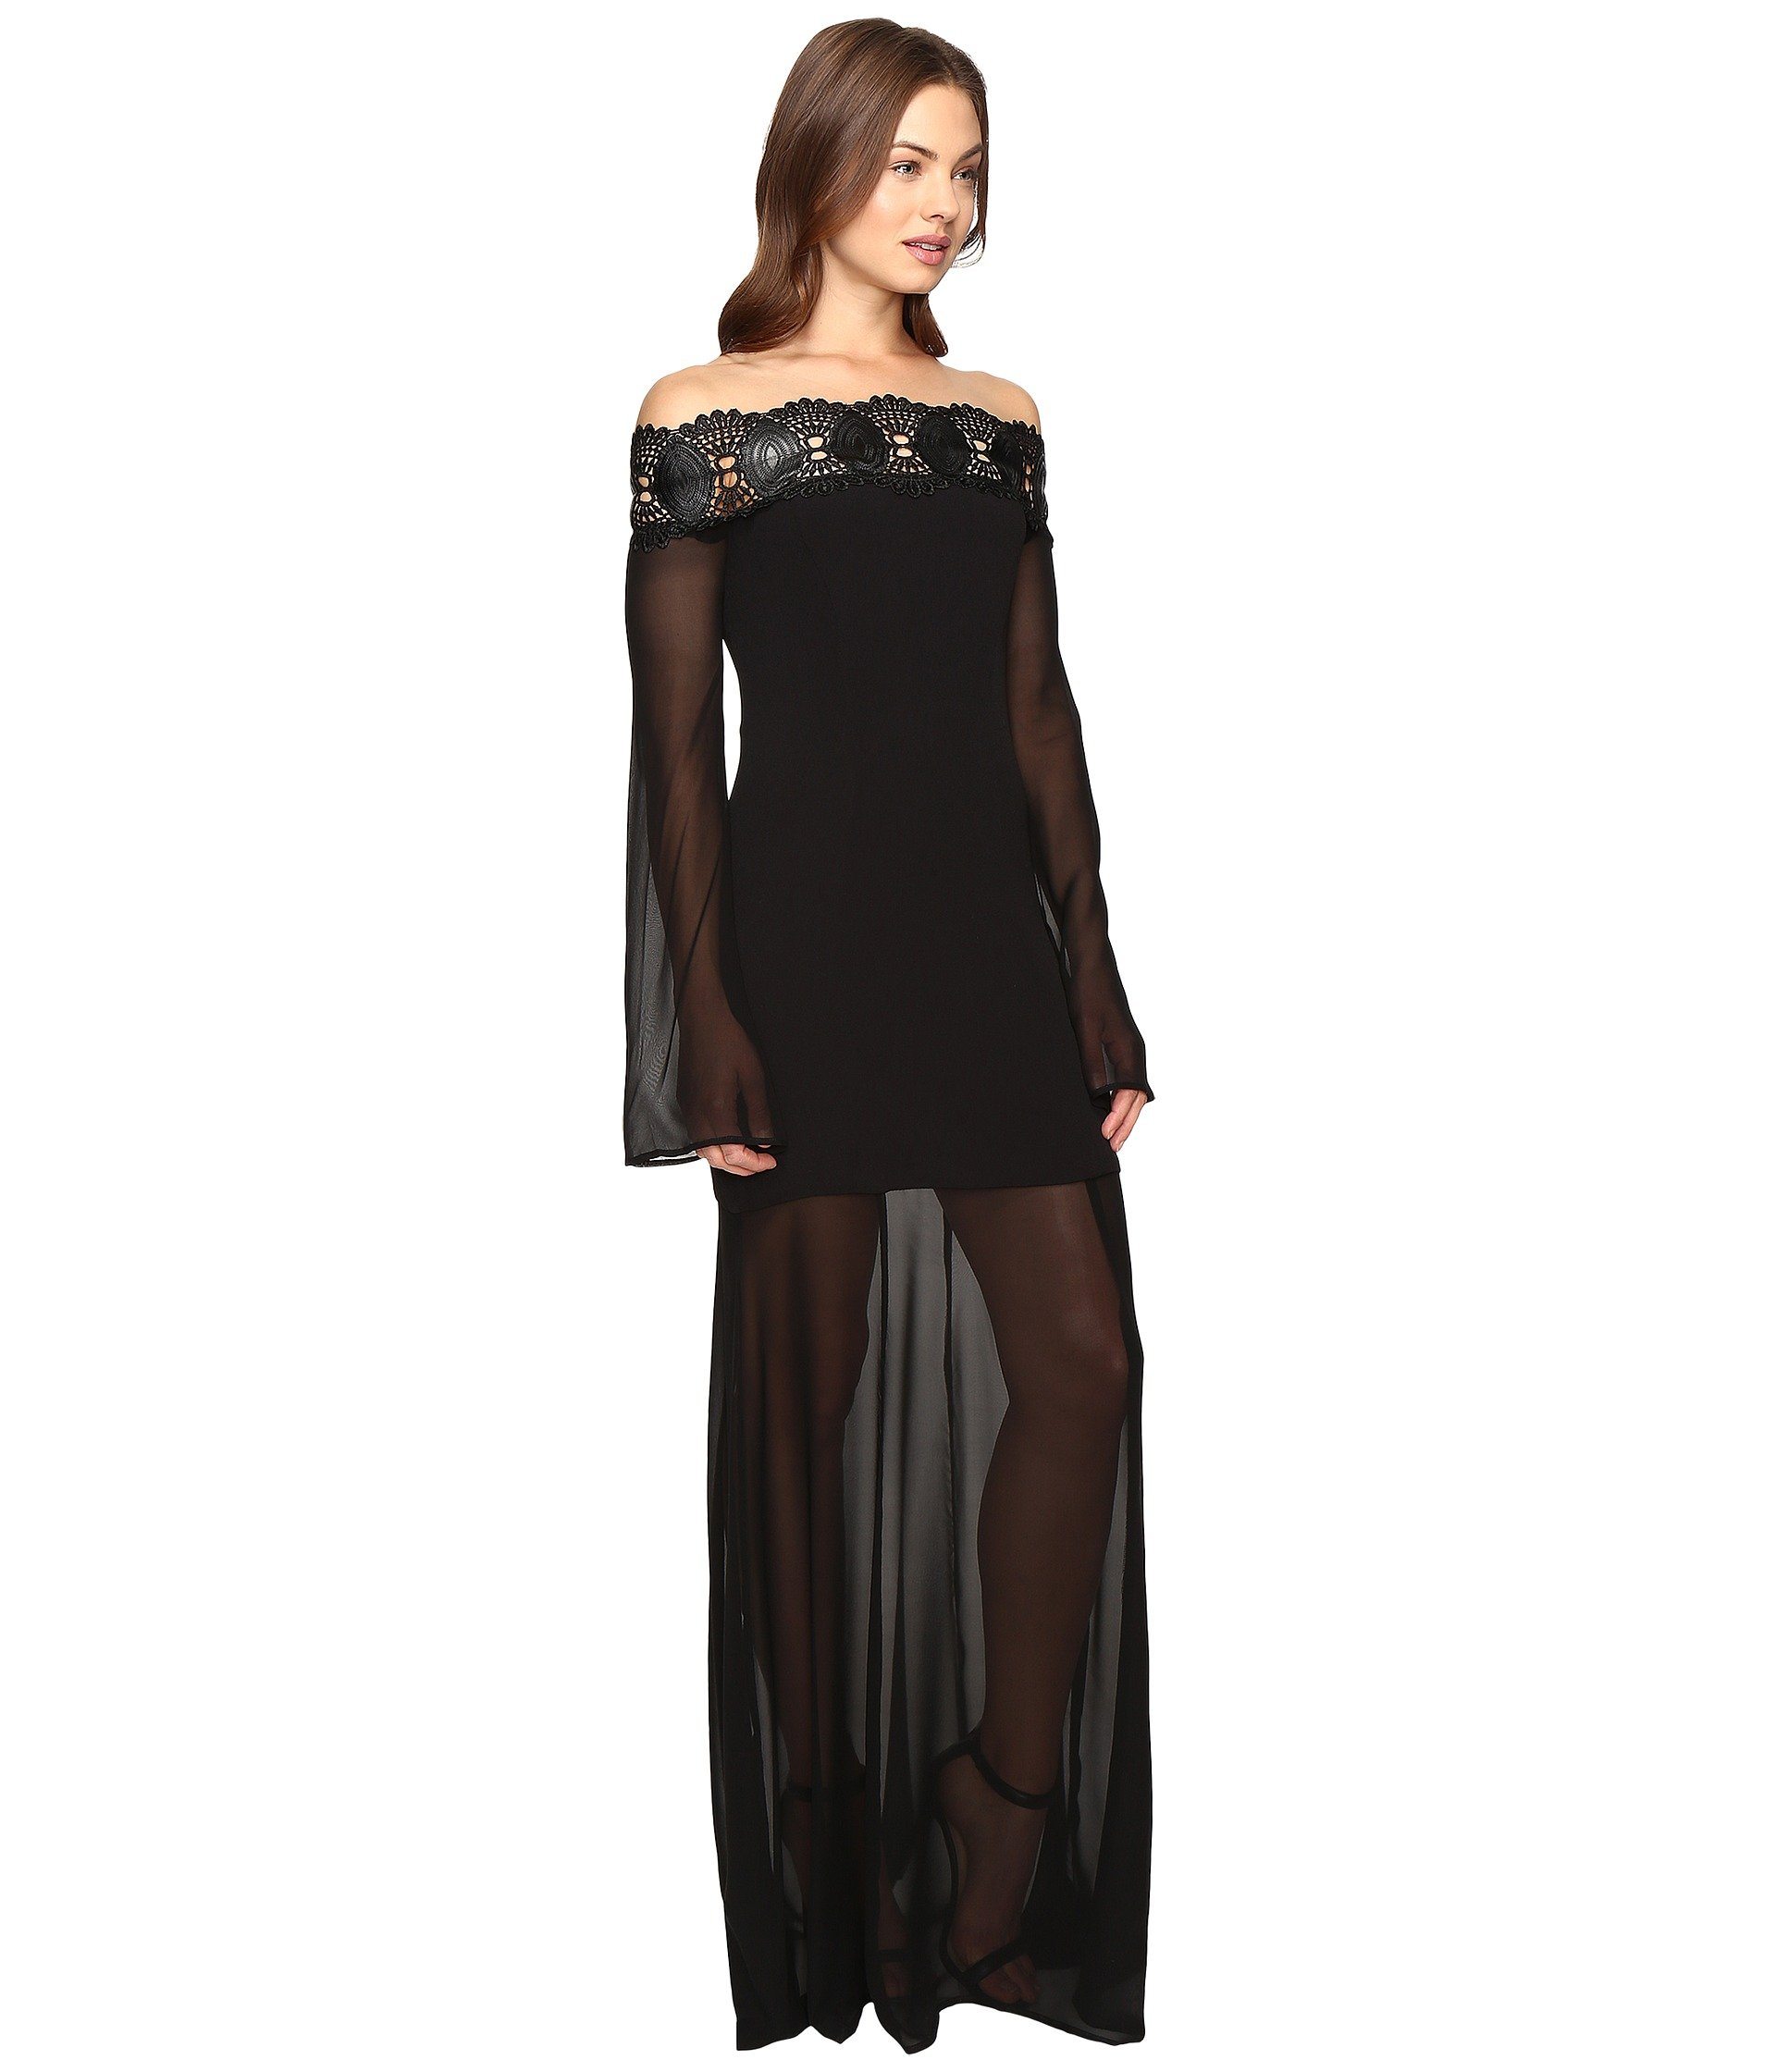 Brunette mode in off the shoulder Stone Cold Fox maxi dress with sheer skirt